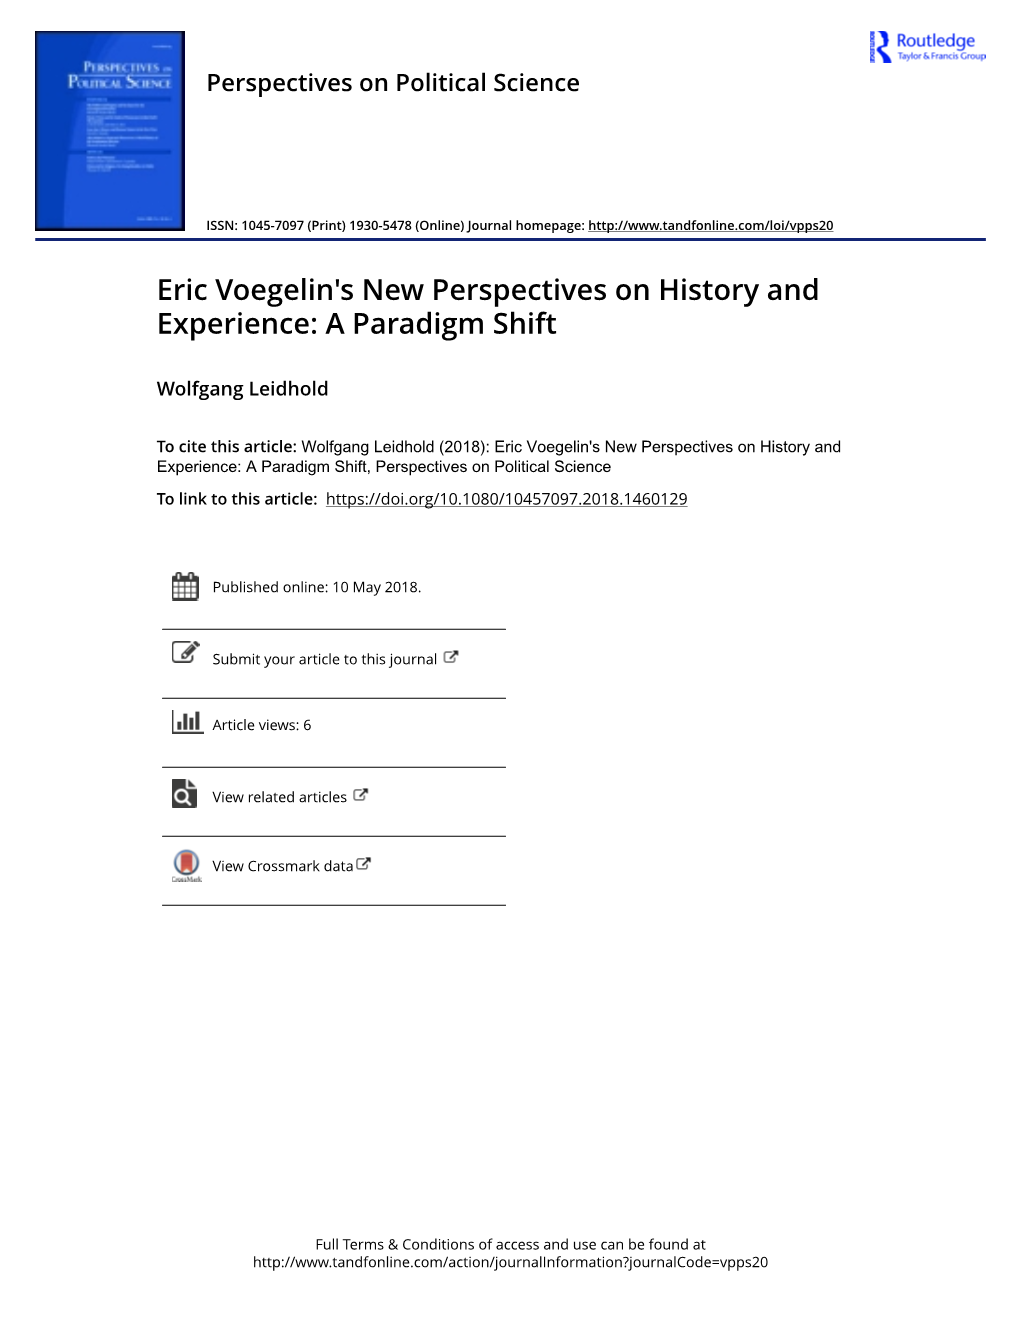 Eric Voegelin's New Perspectives on History and Experience: a Paradigm Shift